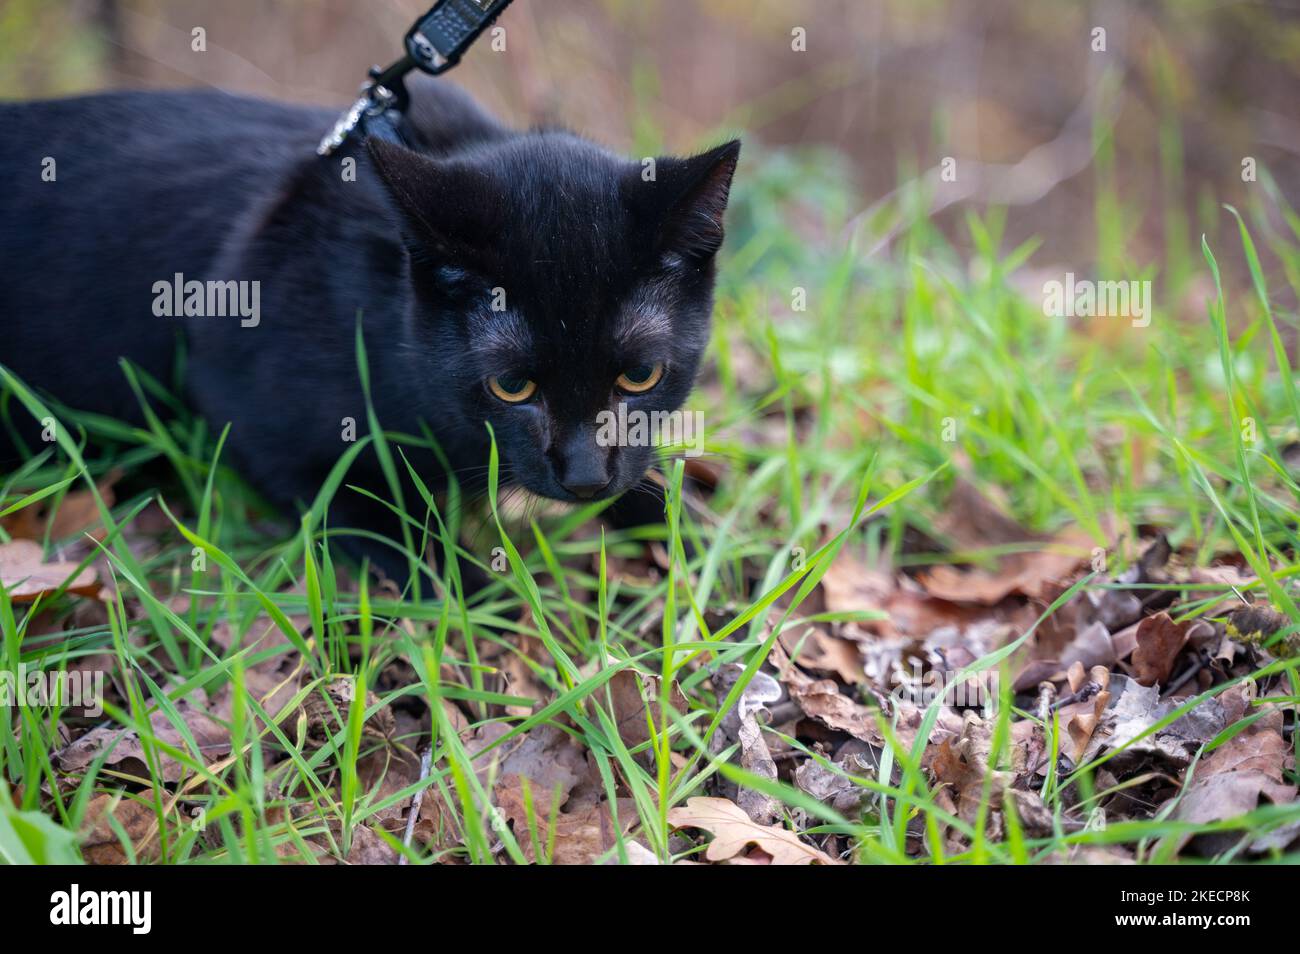 A black cat on a leash in nature at autumn time Stock Photo